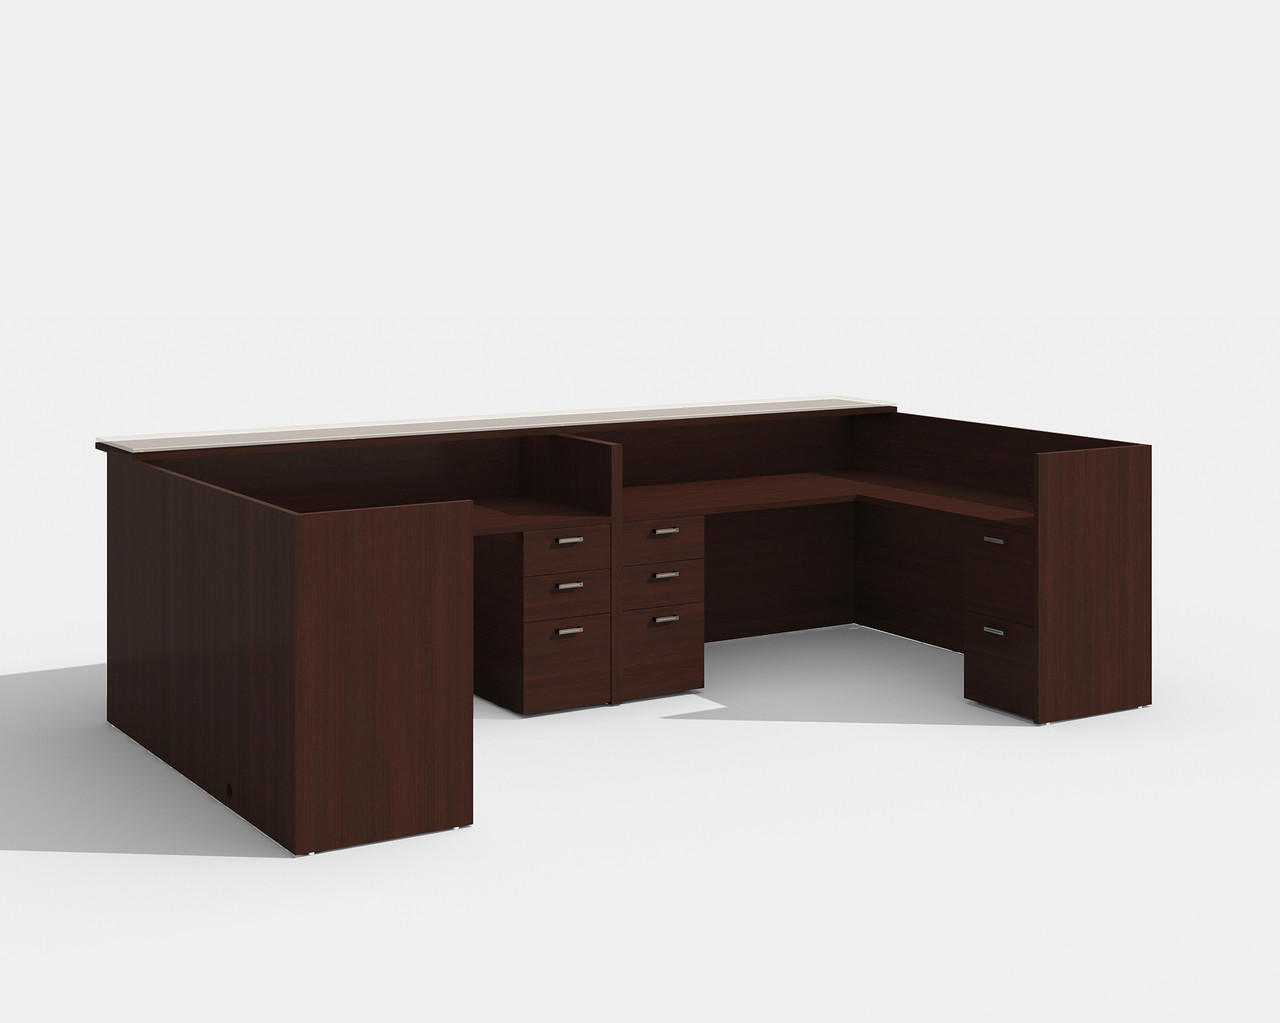 Cherryman Office Furniture Cherryman Amber Series AM-404N Multi User Reception Station with Glass Accents 